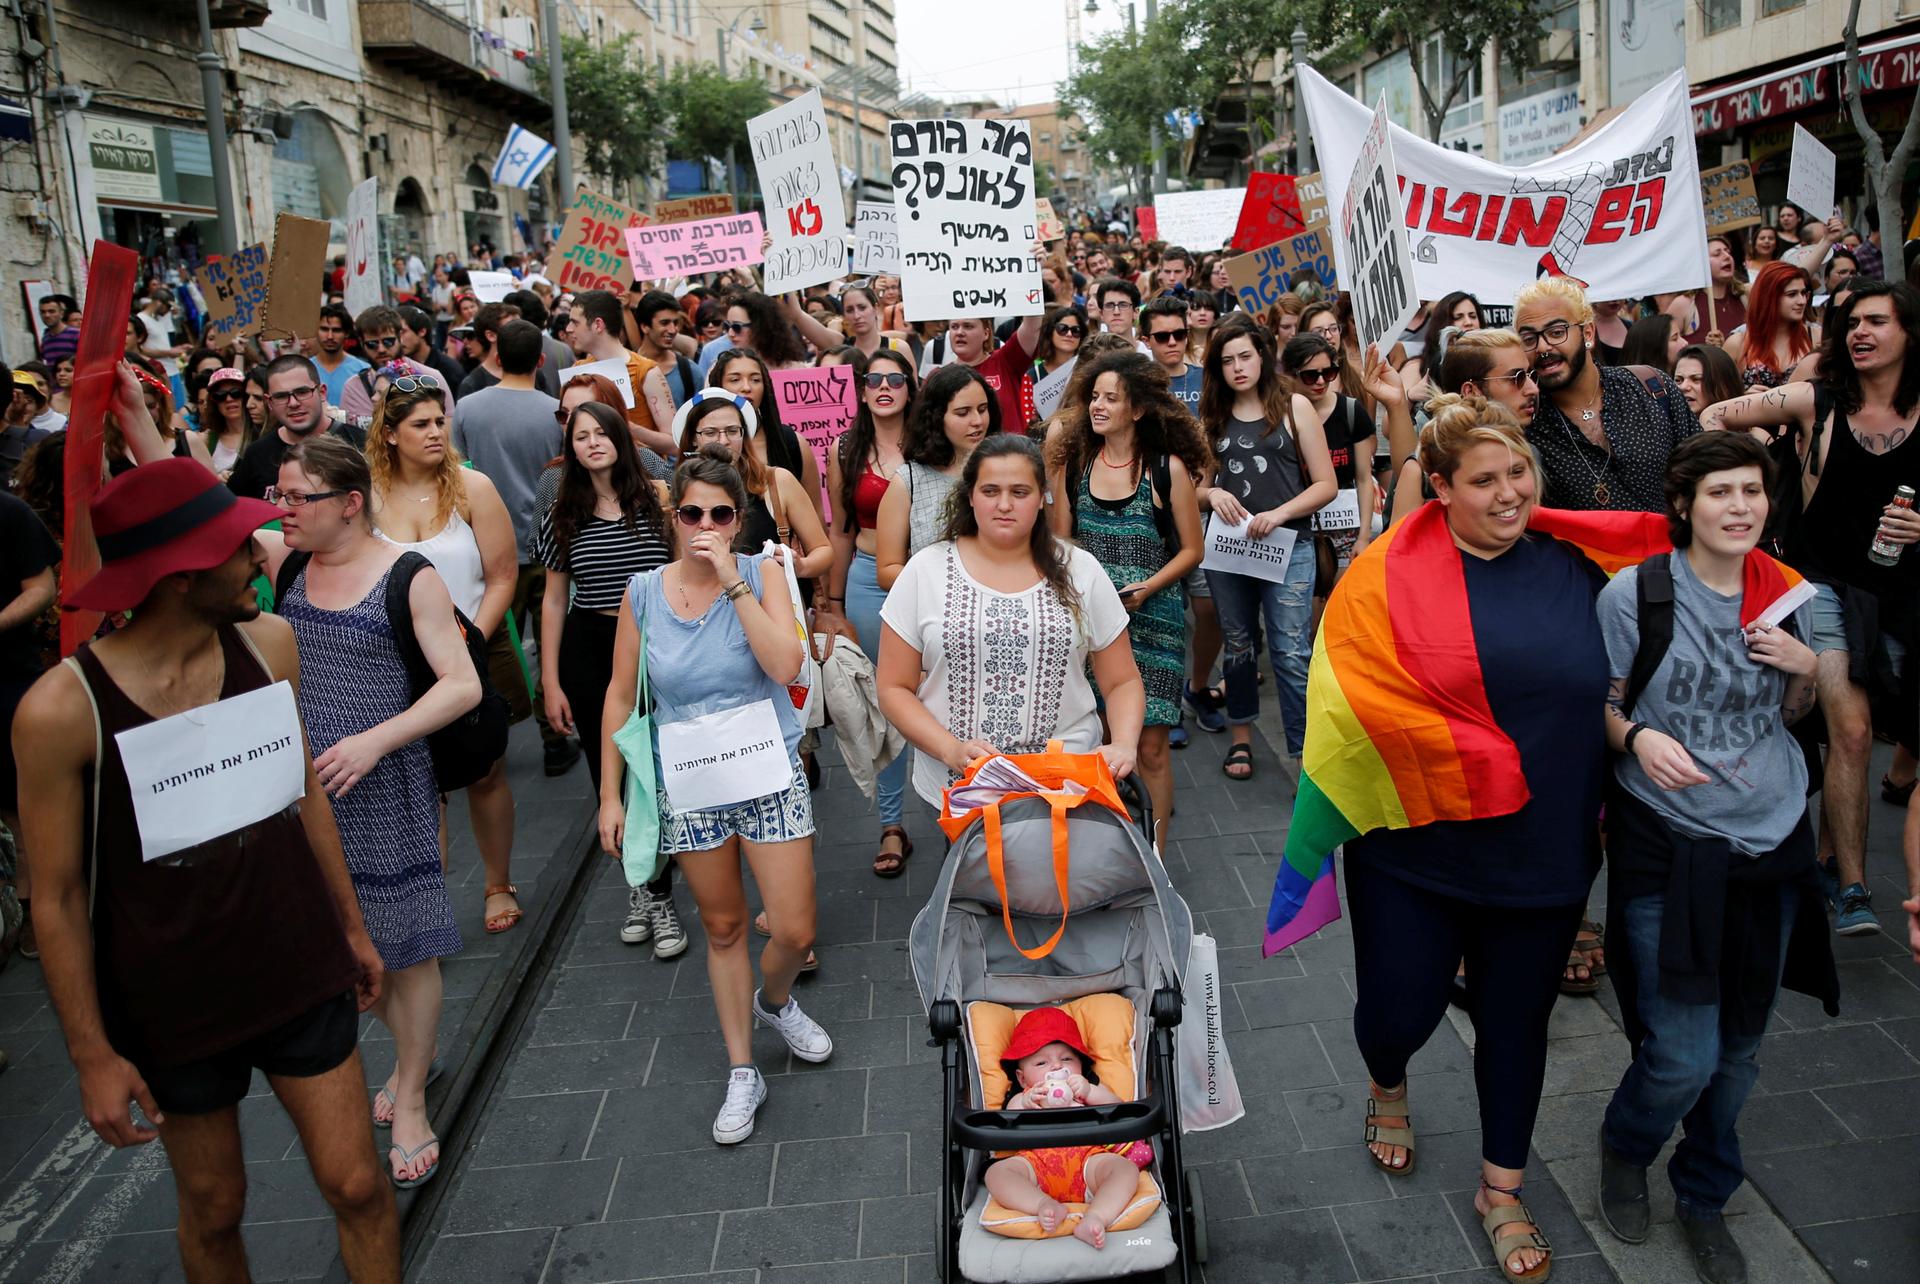 People take part in a "SlutWalk" protest, during which several hundred participants march through the centre of Jerusalem, May 13, 2016.